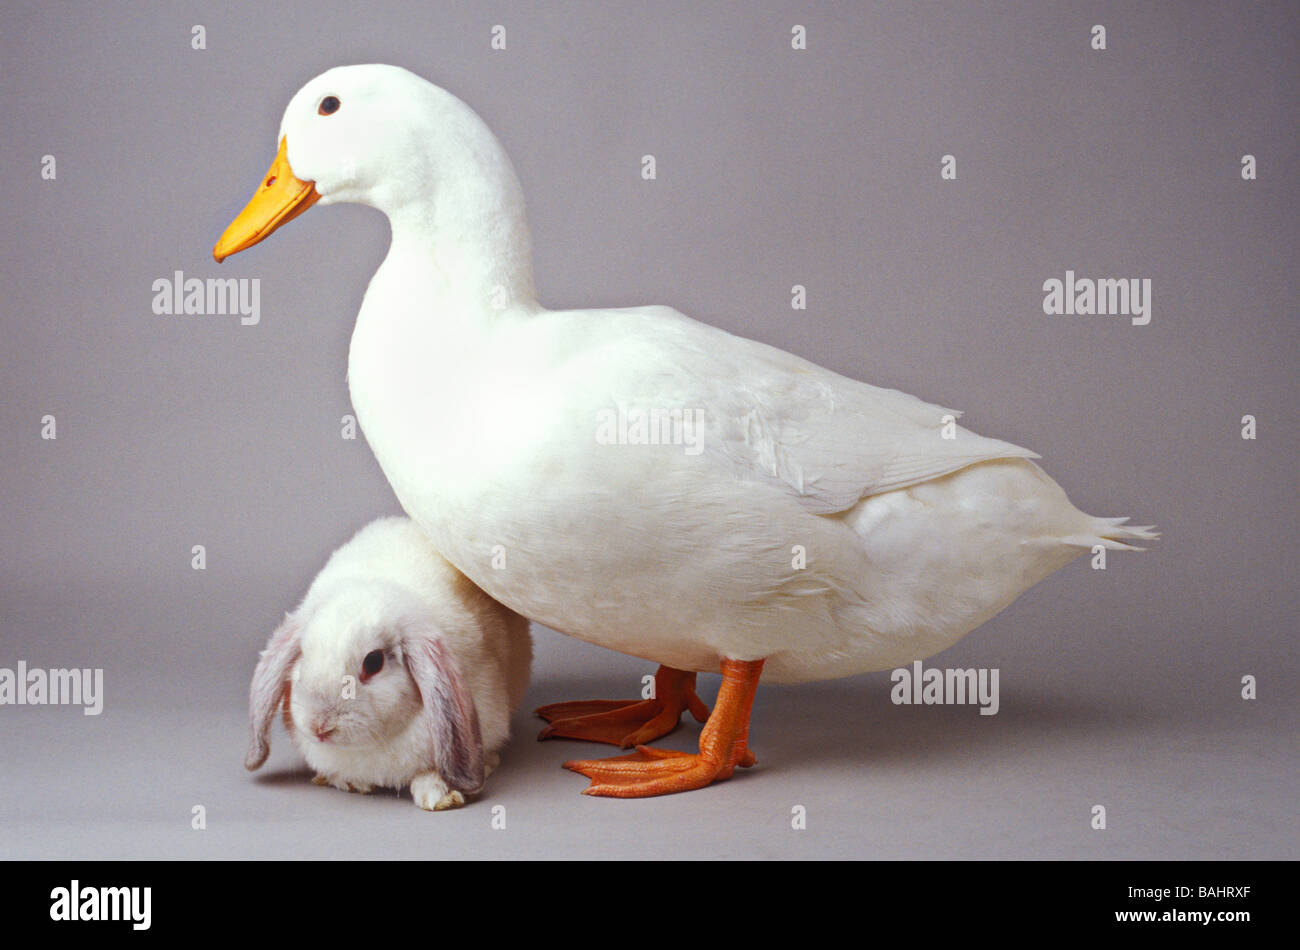 Duck and bunny Stock Photo